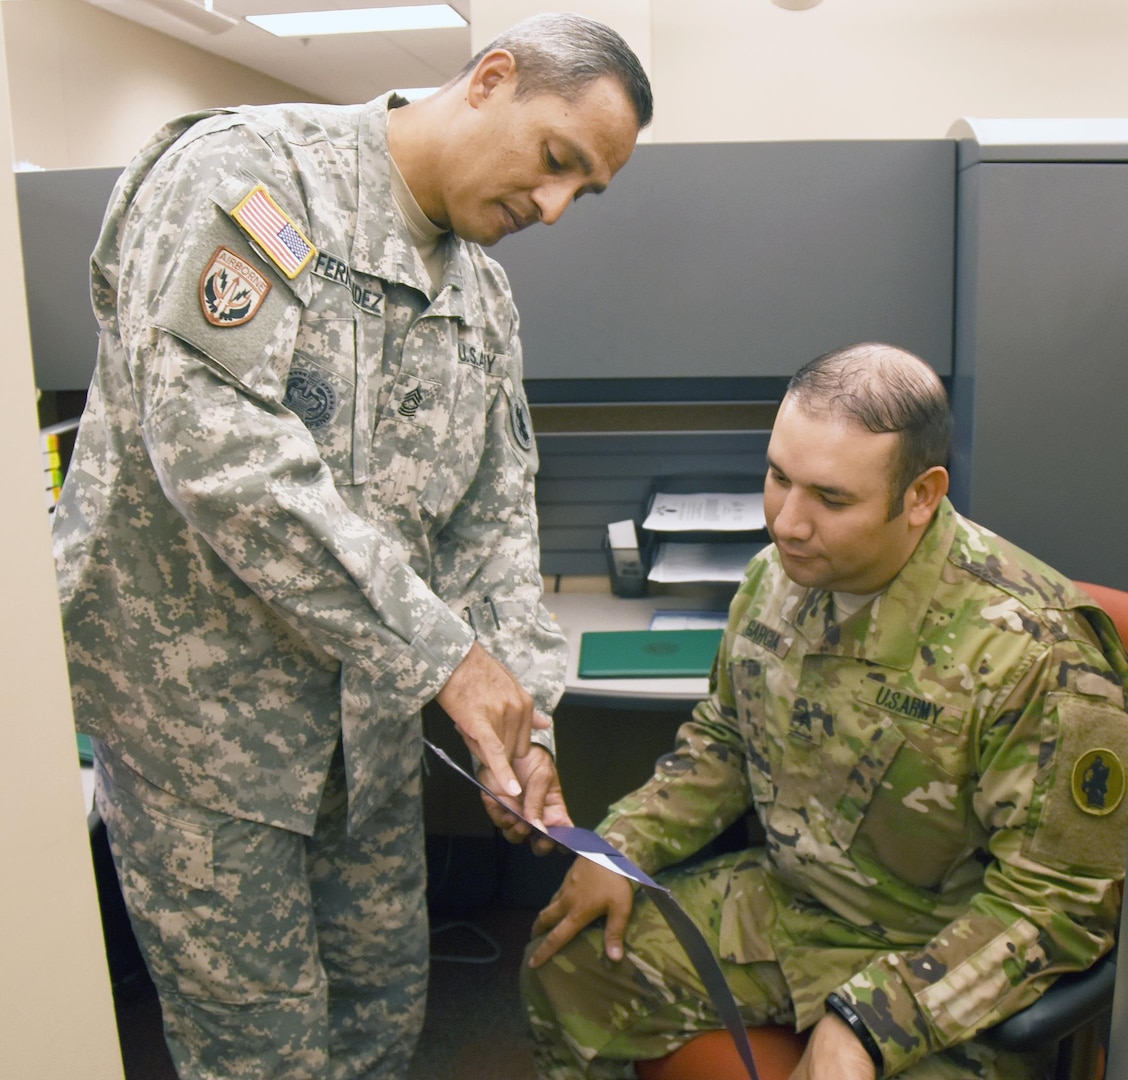 Former drill sergeant Master Sgt. Tomas Fernandez (left), human resources plans and operation noncommissioned officer with U.S. Army South, explains how to prepare an award certificate to Sgt. Jamie Garcia, a personnel management NCO, as part of a one-on-one training session. Fernandez served as a drill sergeant from 2005-2007 at Fort Jackson, S.C.  